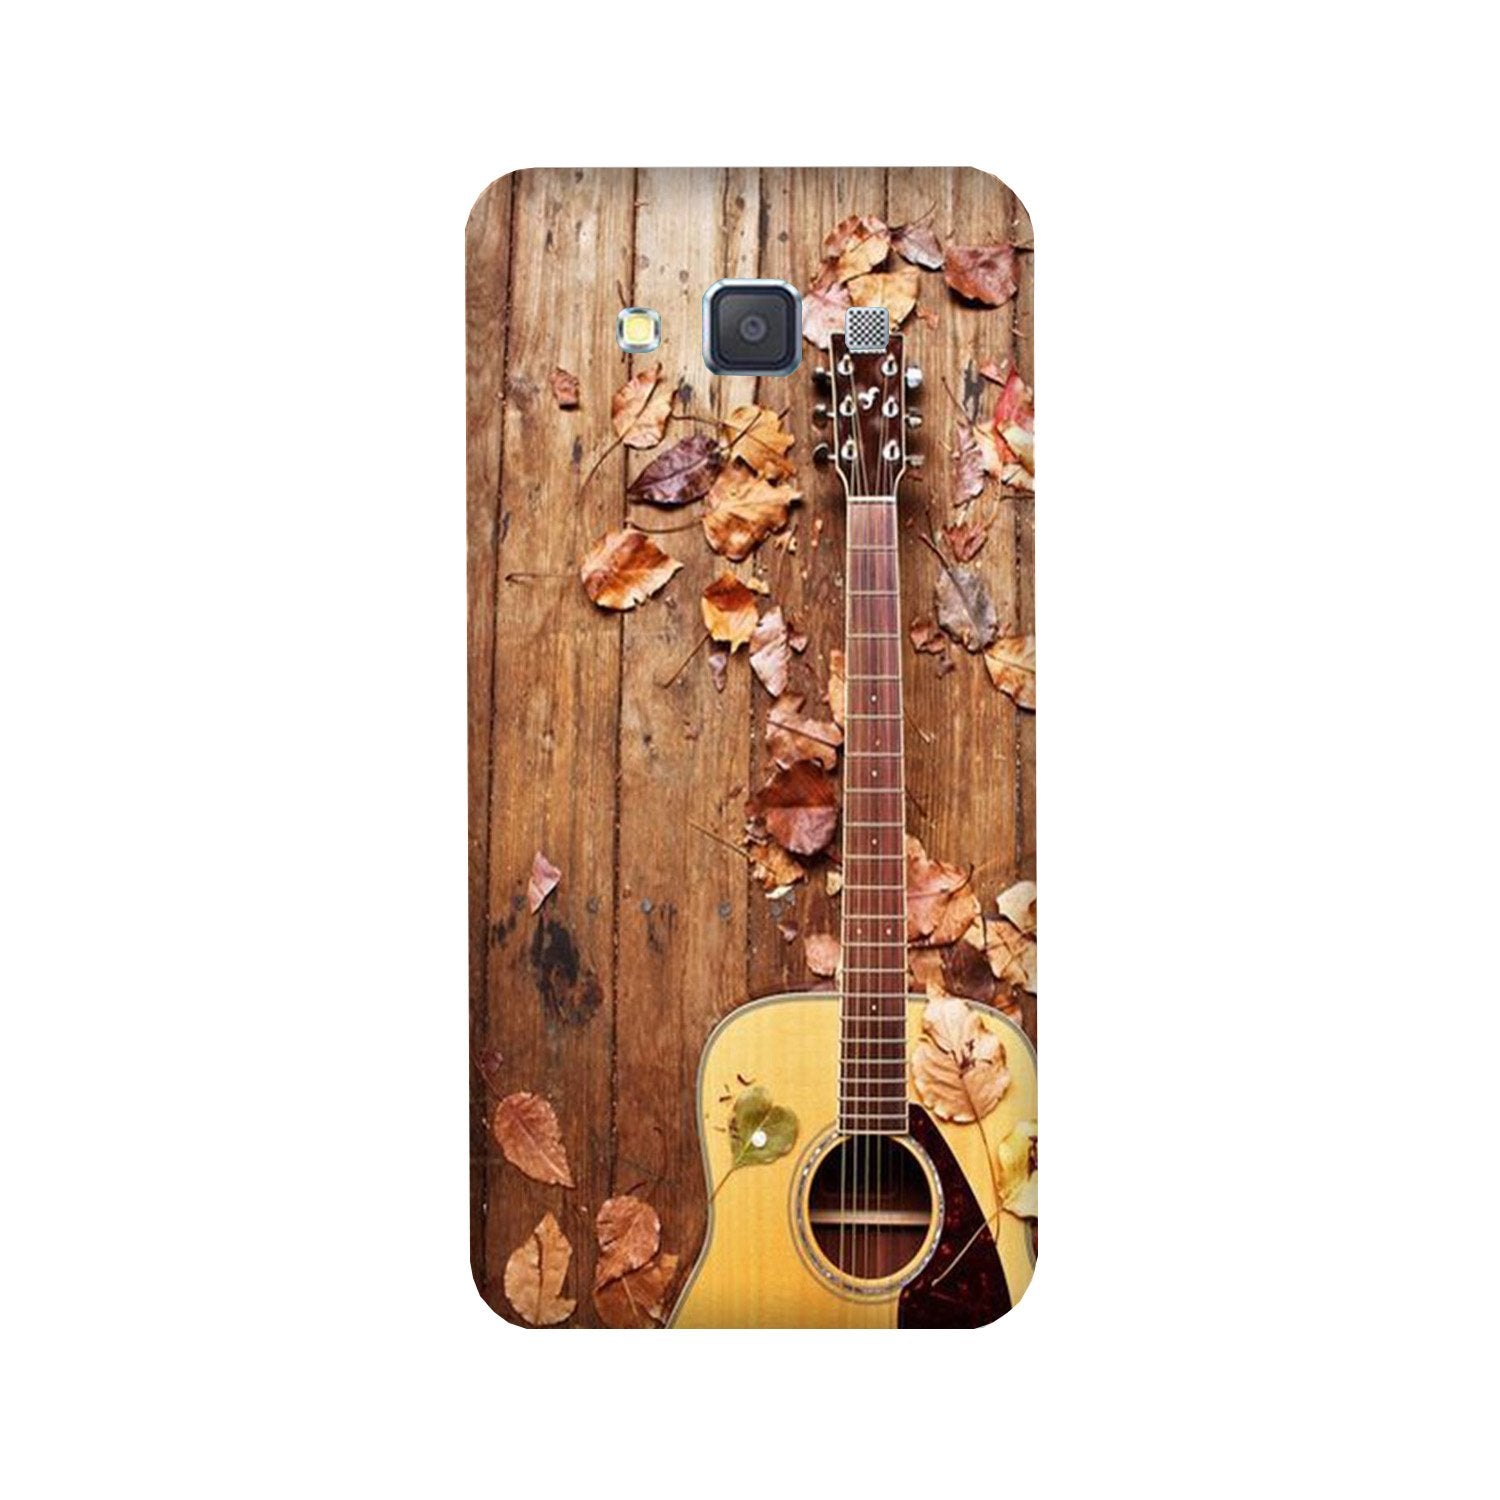 Guitar Case for Galaxy ON7/ON7 Pro